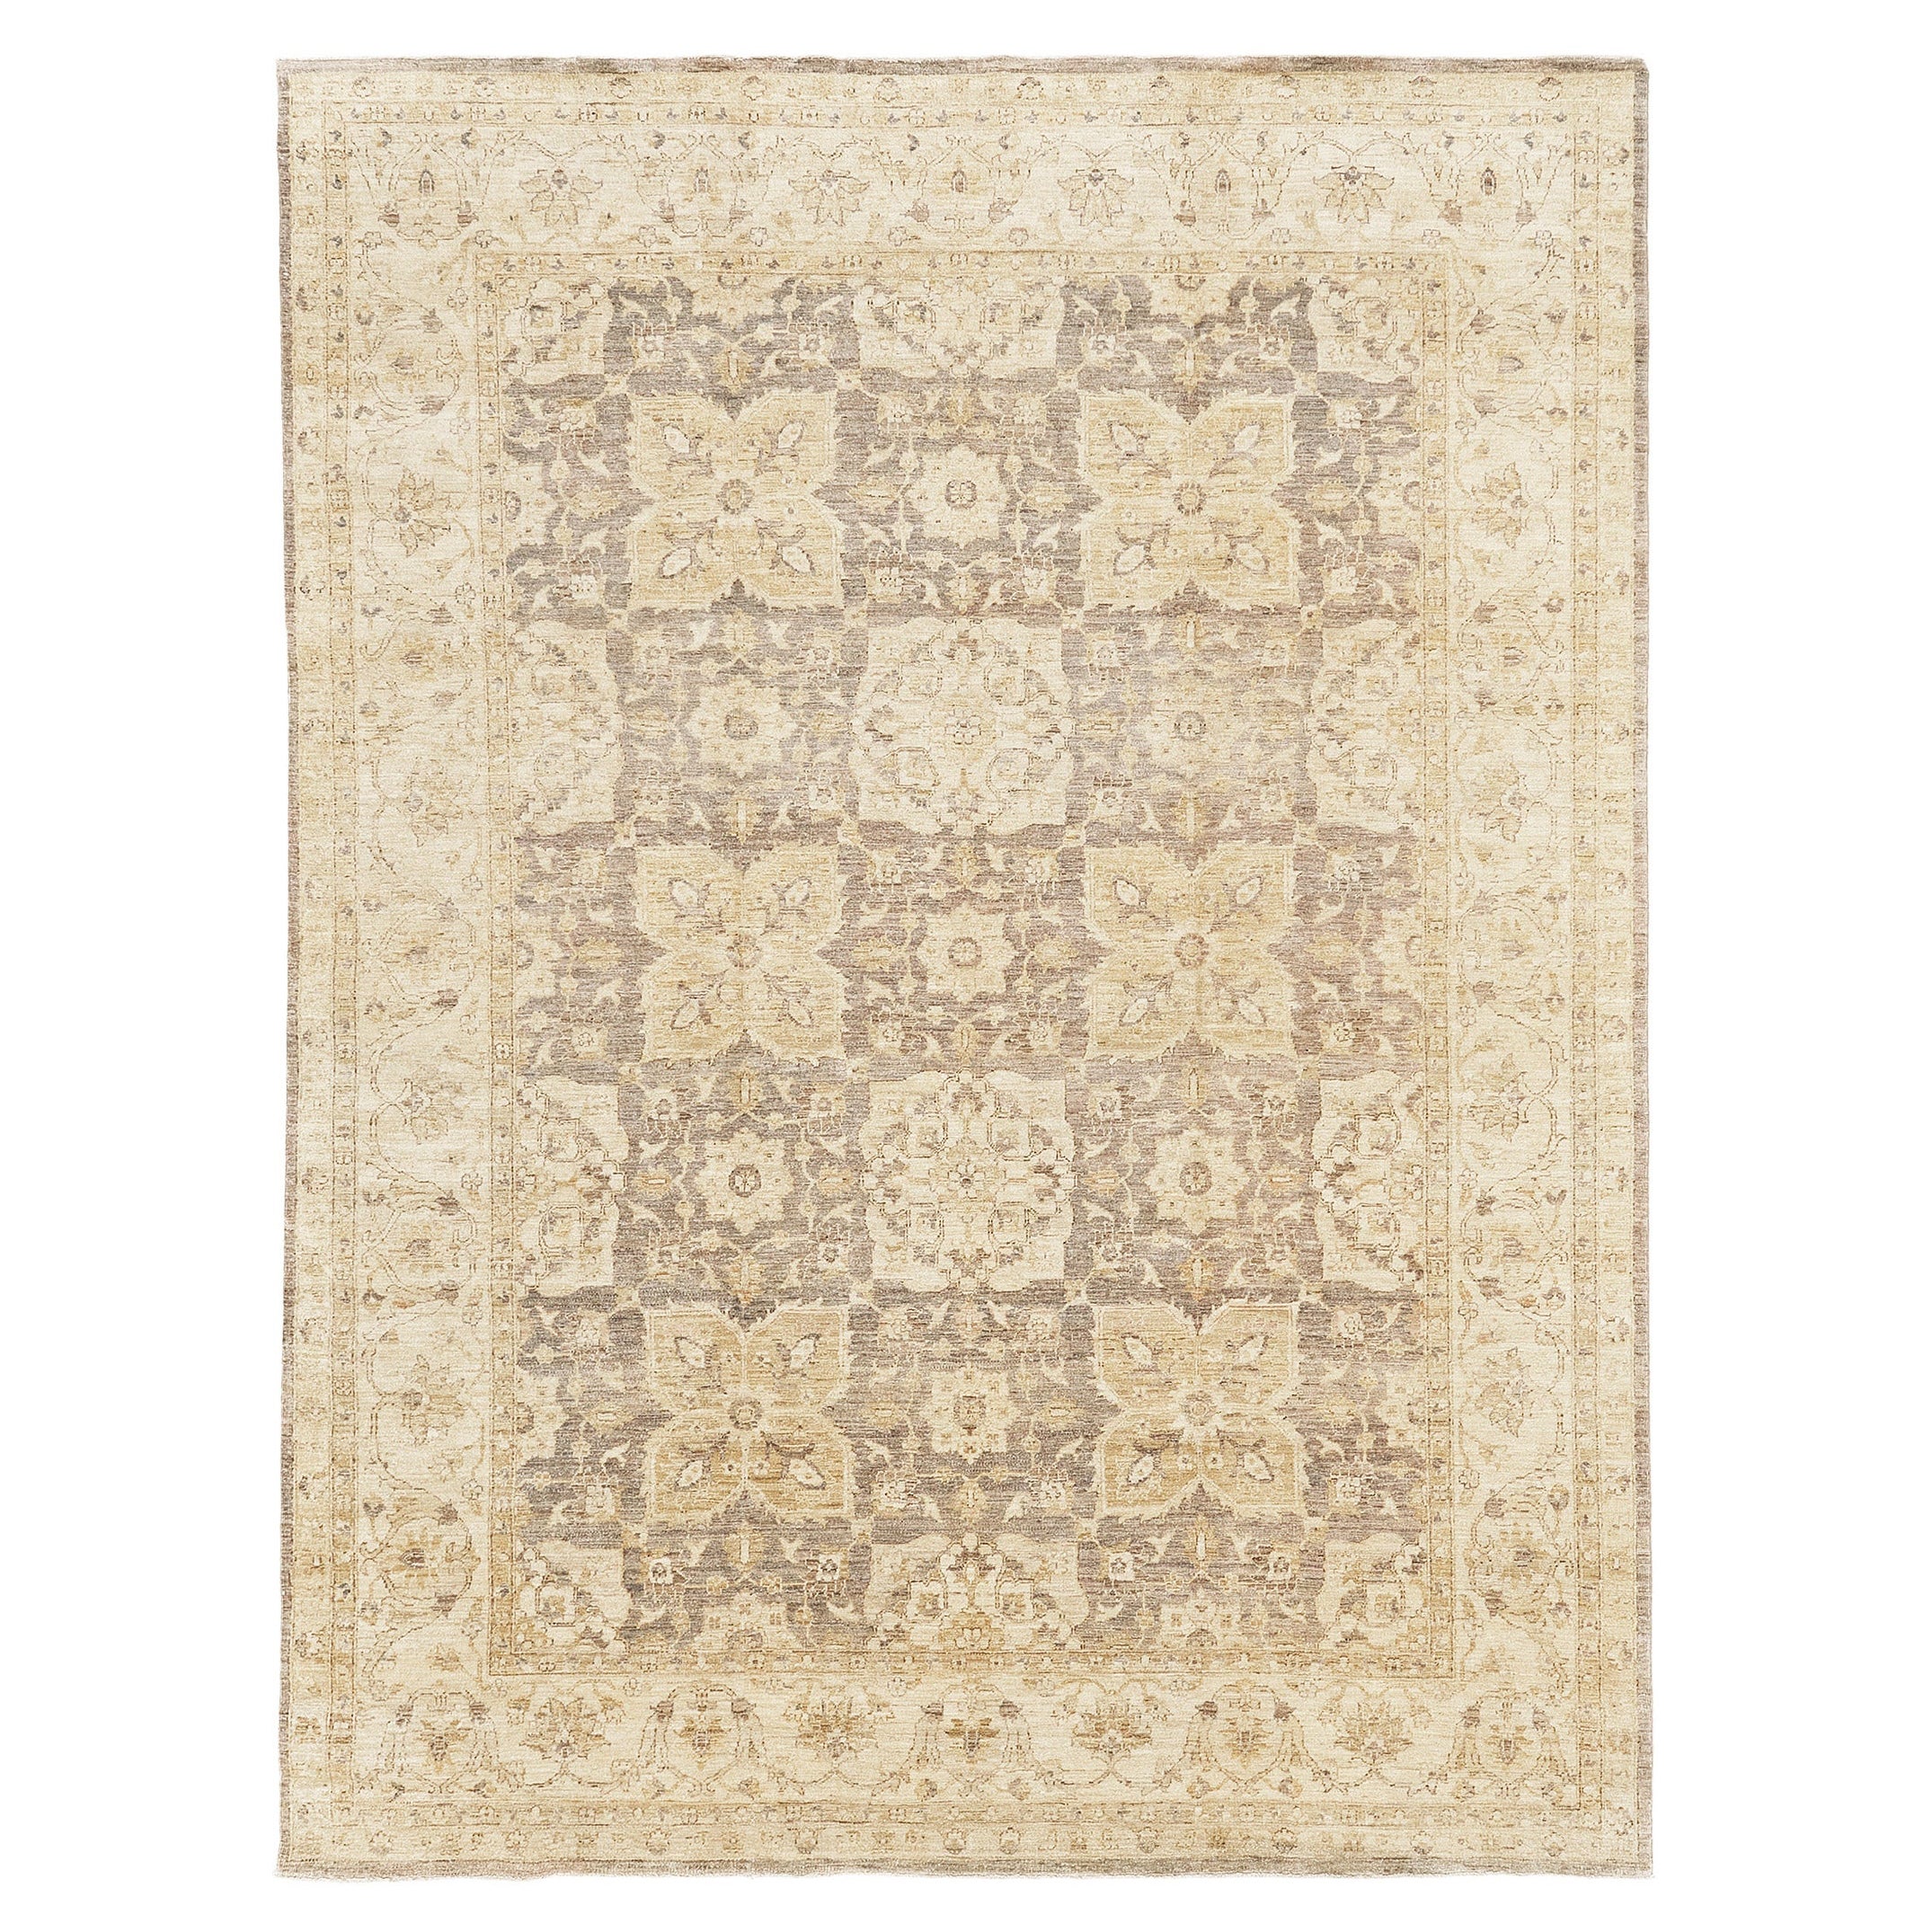 Natural Dye Agra Design Rug Bliss Collection D5559 For Sale